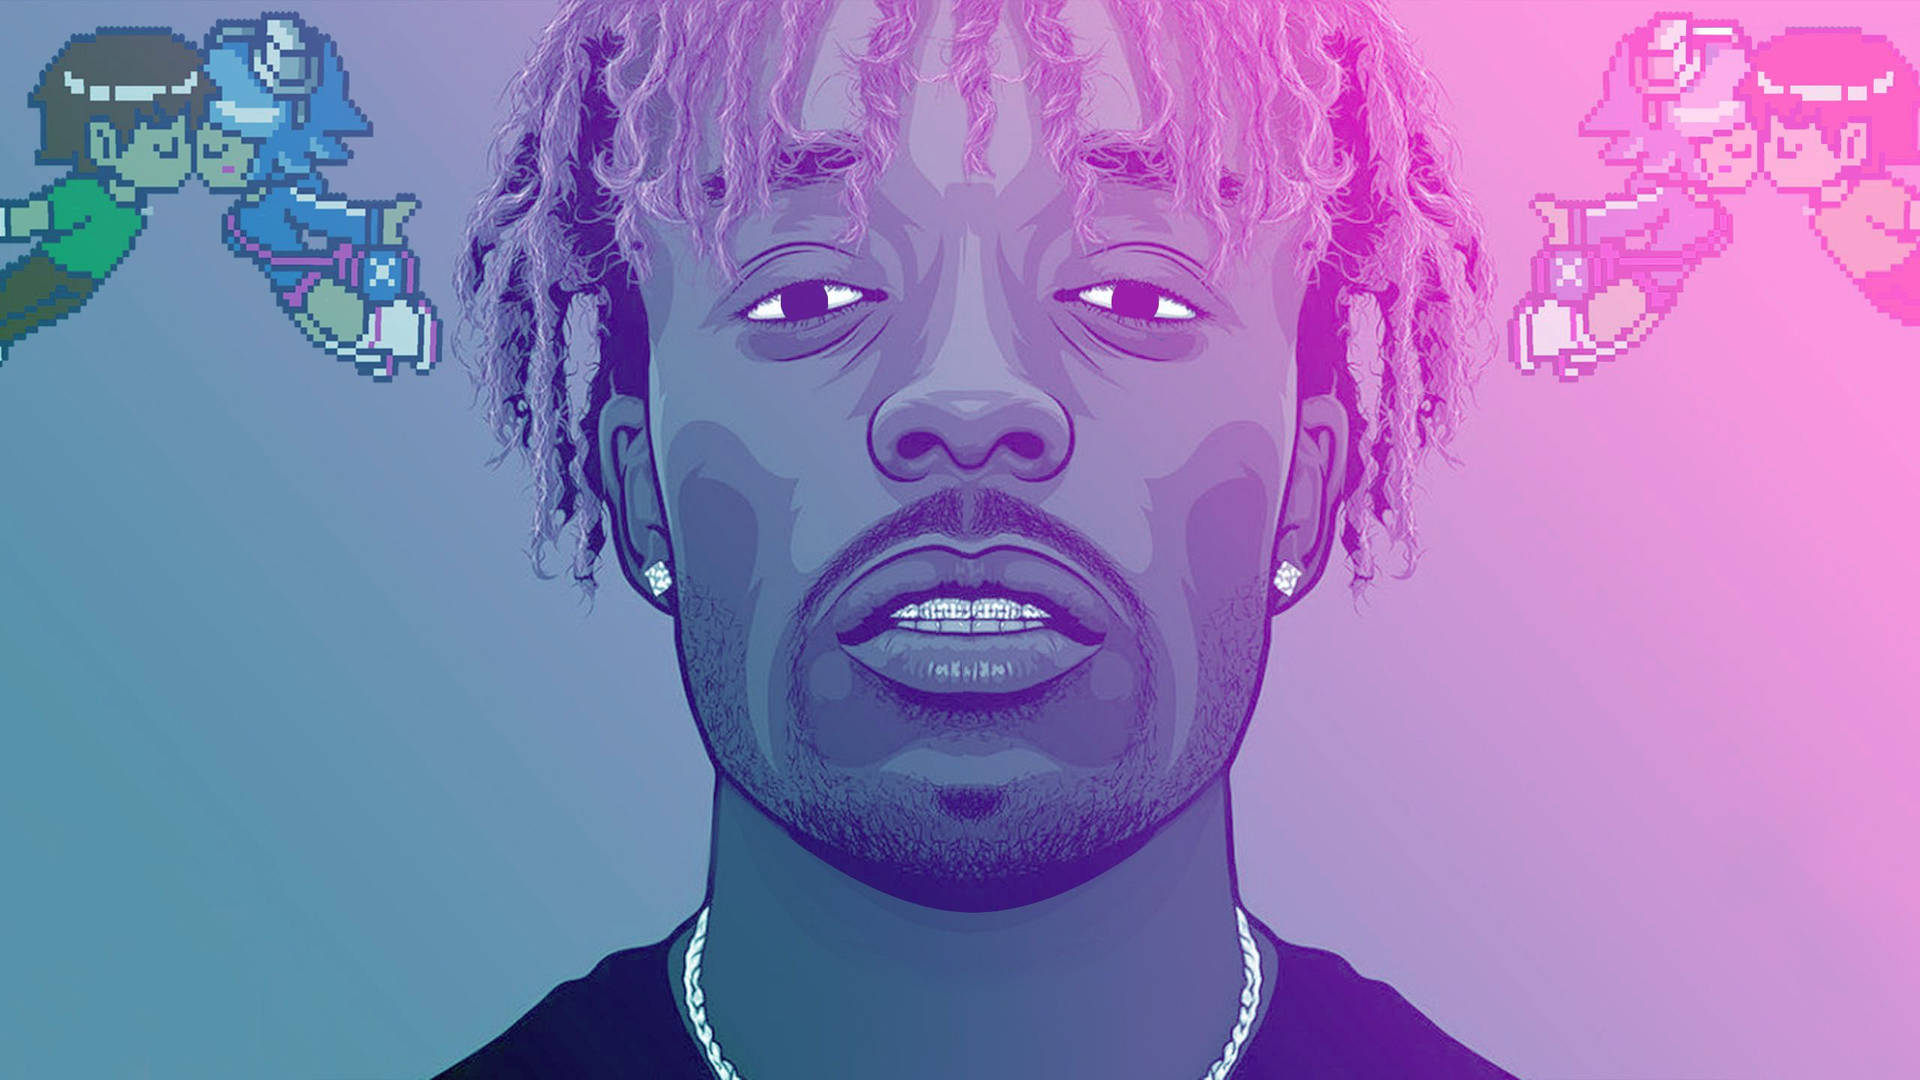 Lil Uzi Vert is a talented teen rapper whose music is quickly catching on with fans. Wallpaper